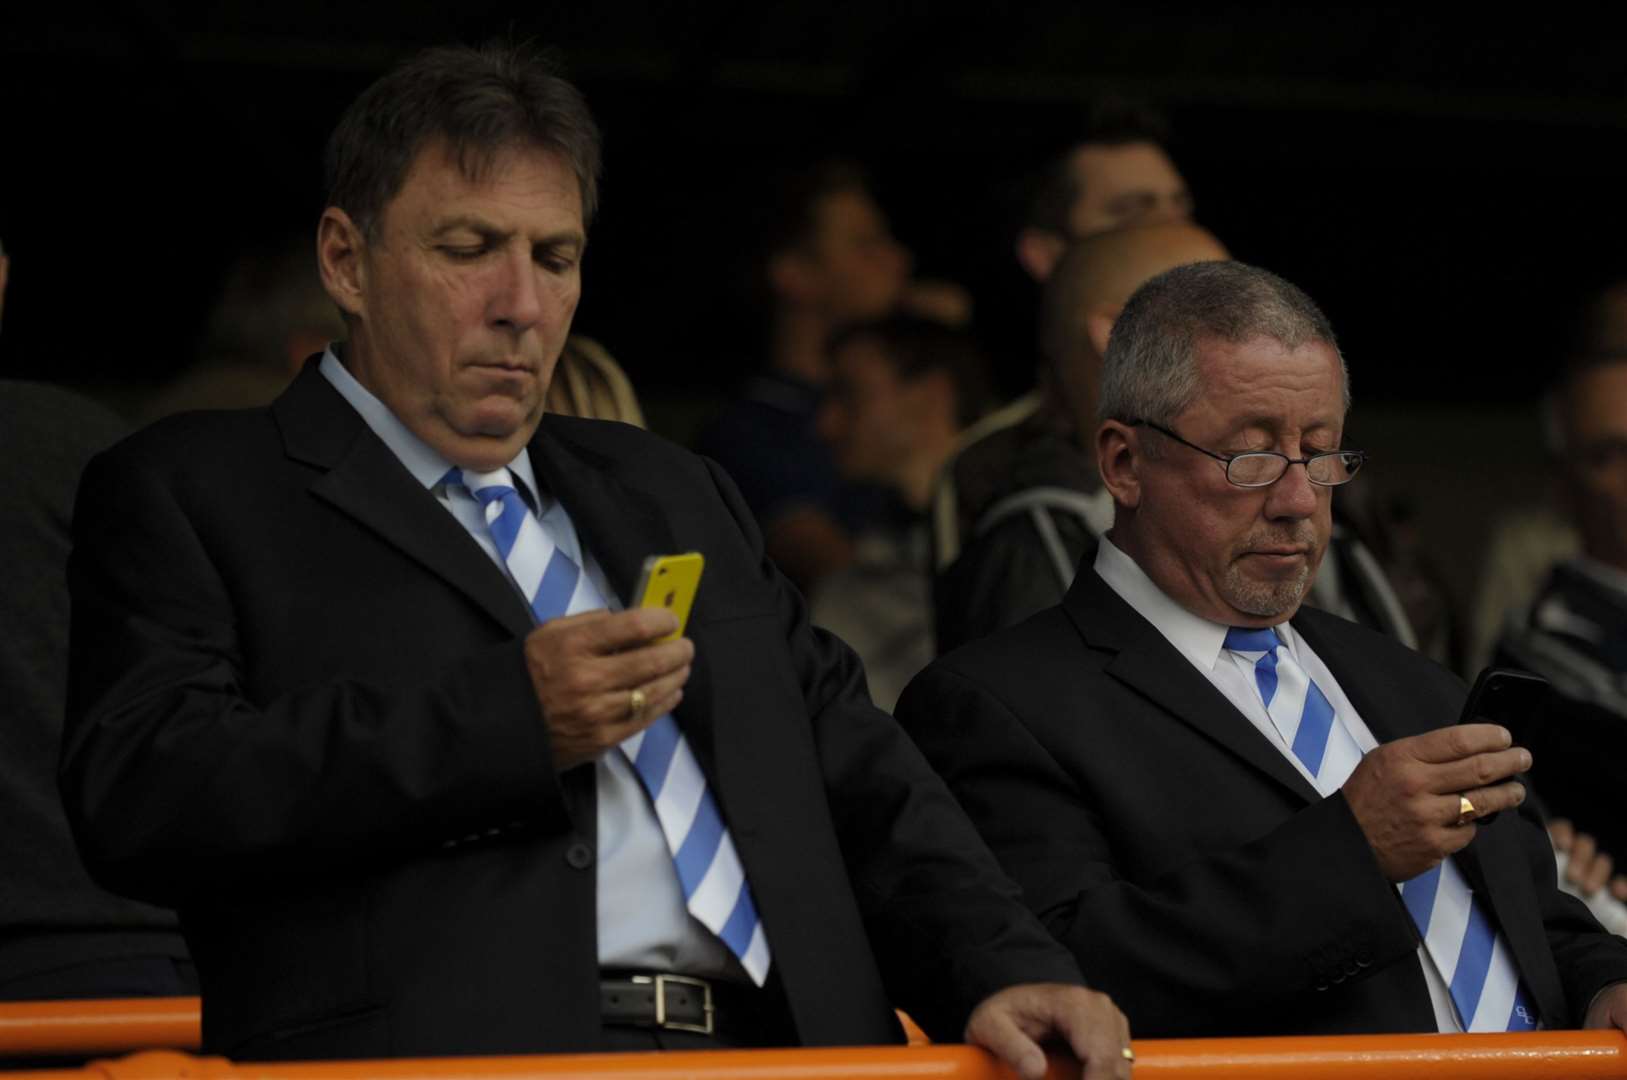 Michael Anderson, left, and Gills' chairman Paul Scally